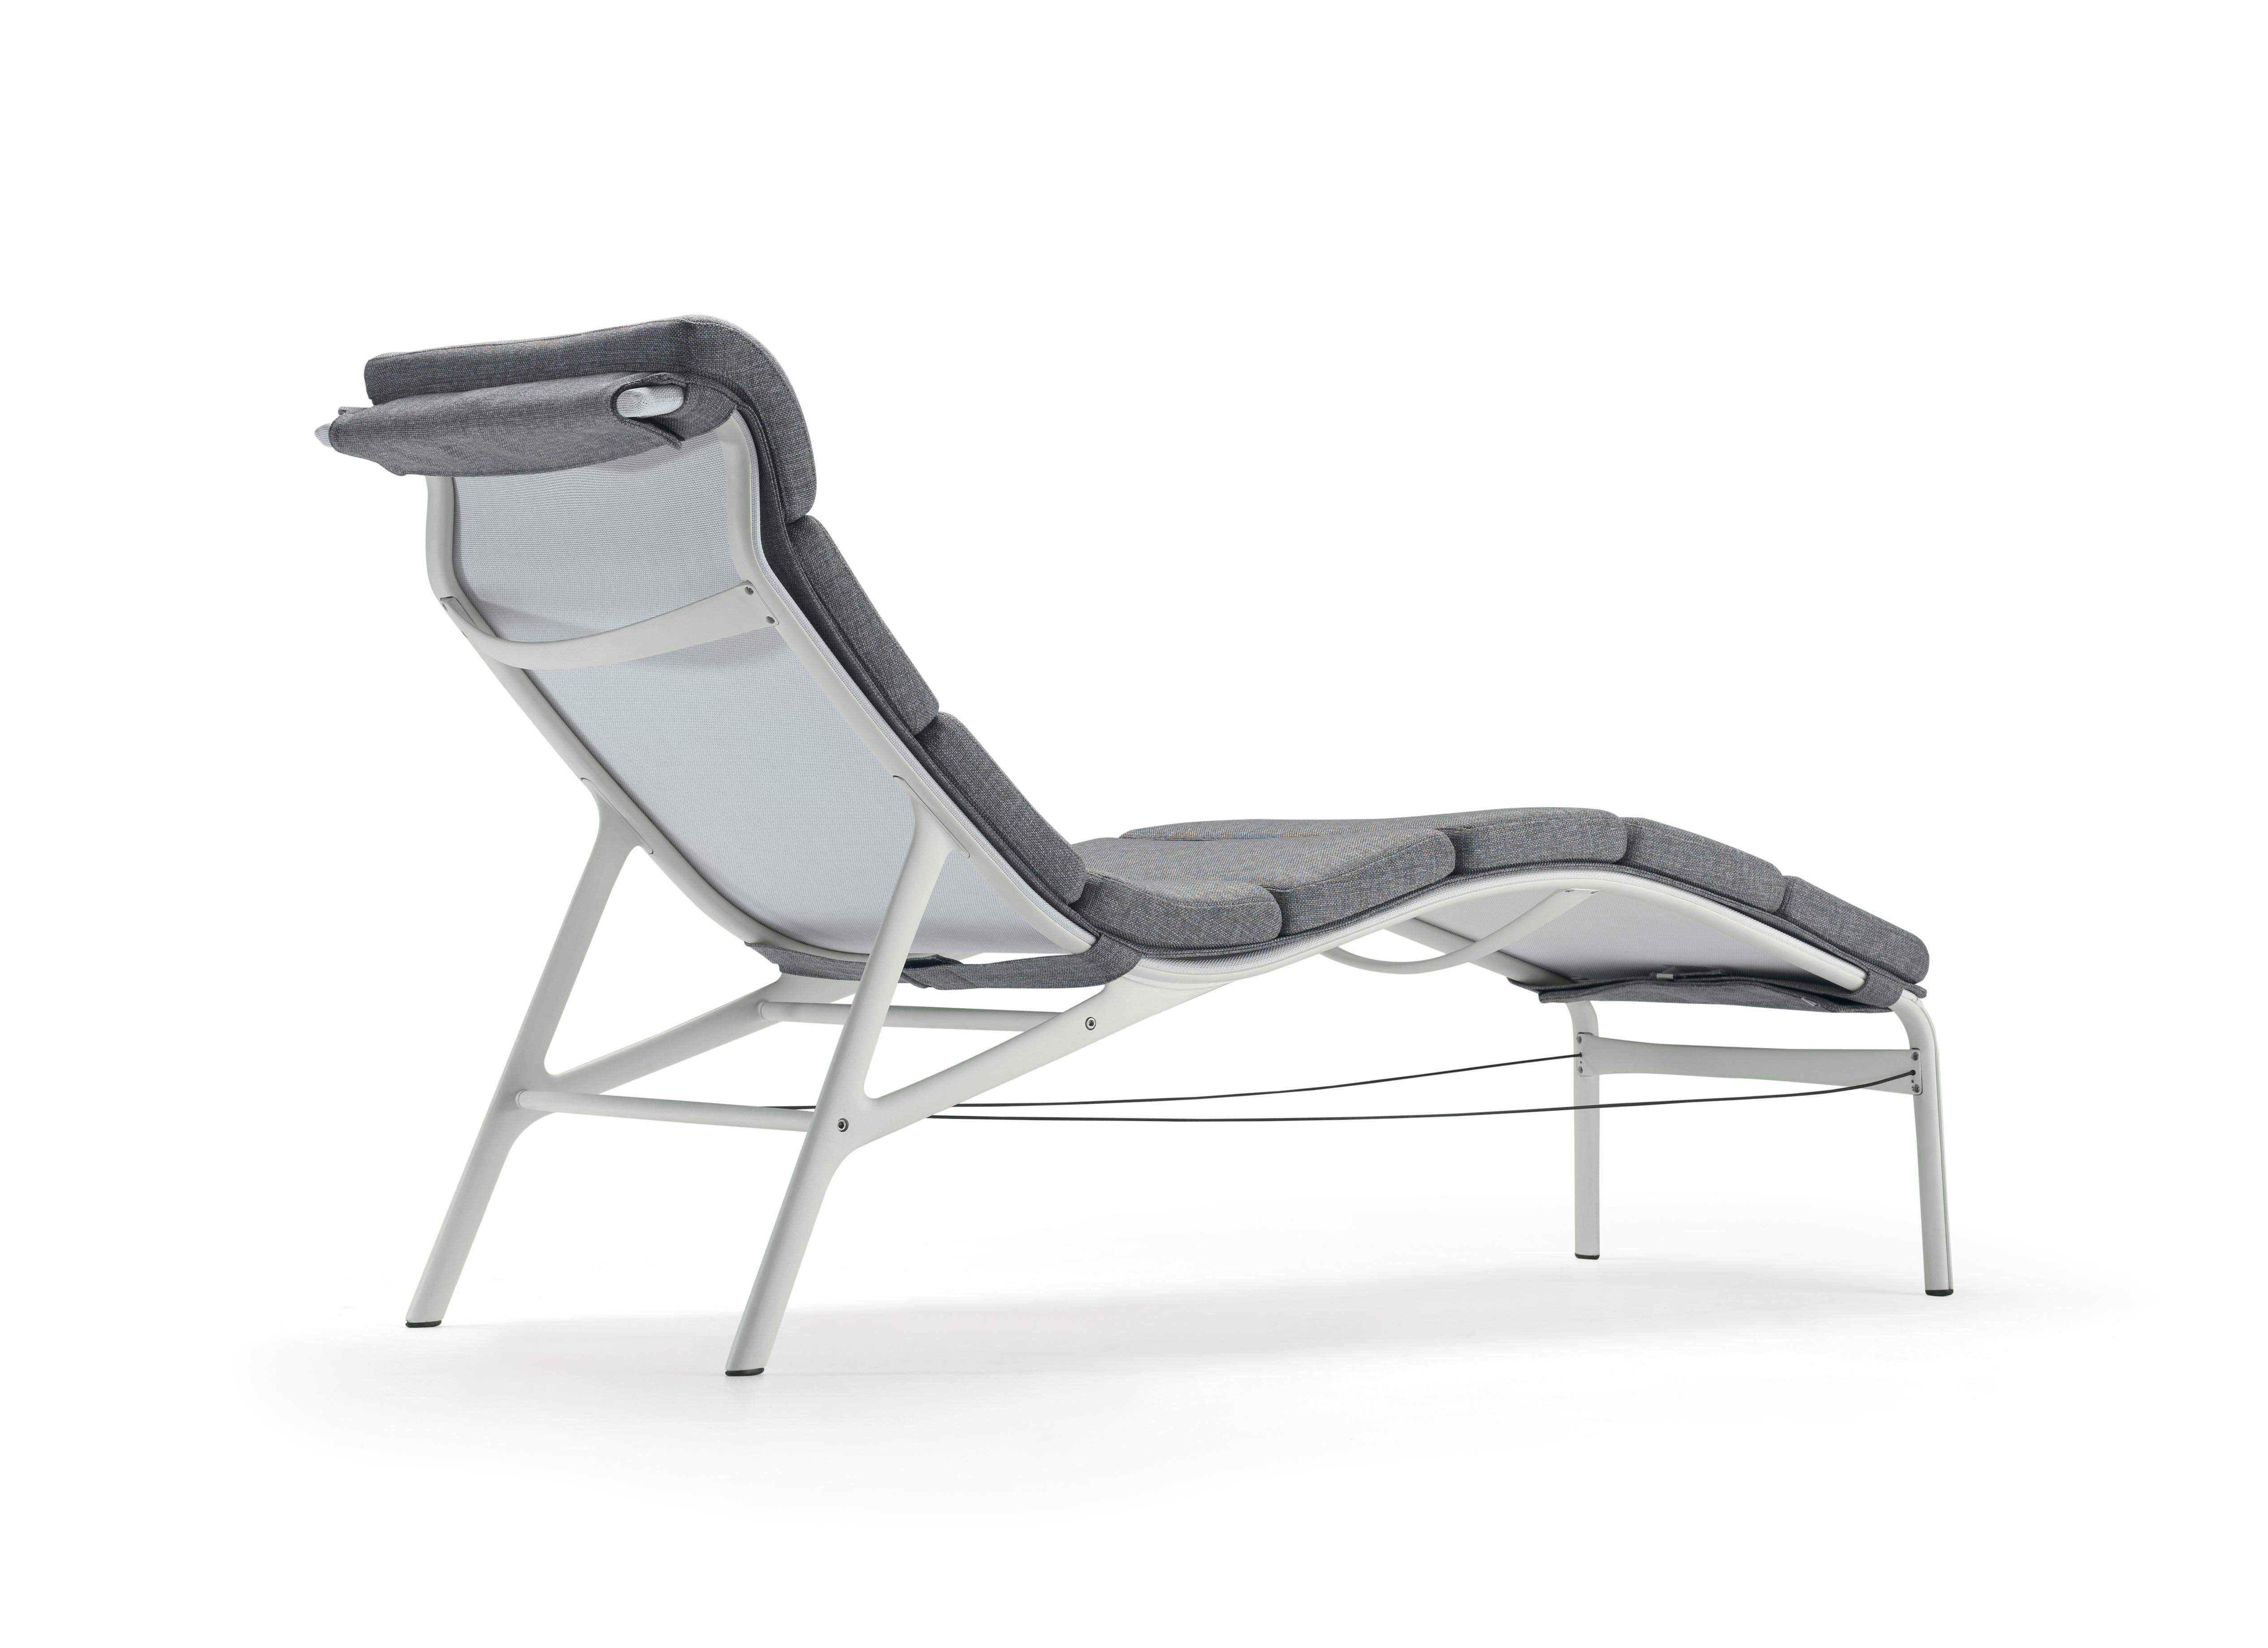 Alias 414 Longframe Soft Outdoor Chair in Grey & White Lacquered Aluminum Frame by Alberto Meda

Chaise longue for outdoor with structure made of extruded aluminium profile and die-cast aluminium elements. Seat and back in fire retardant PVC